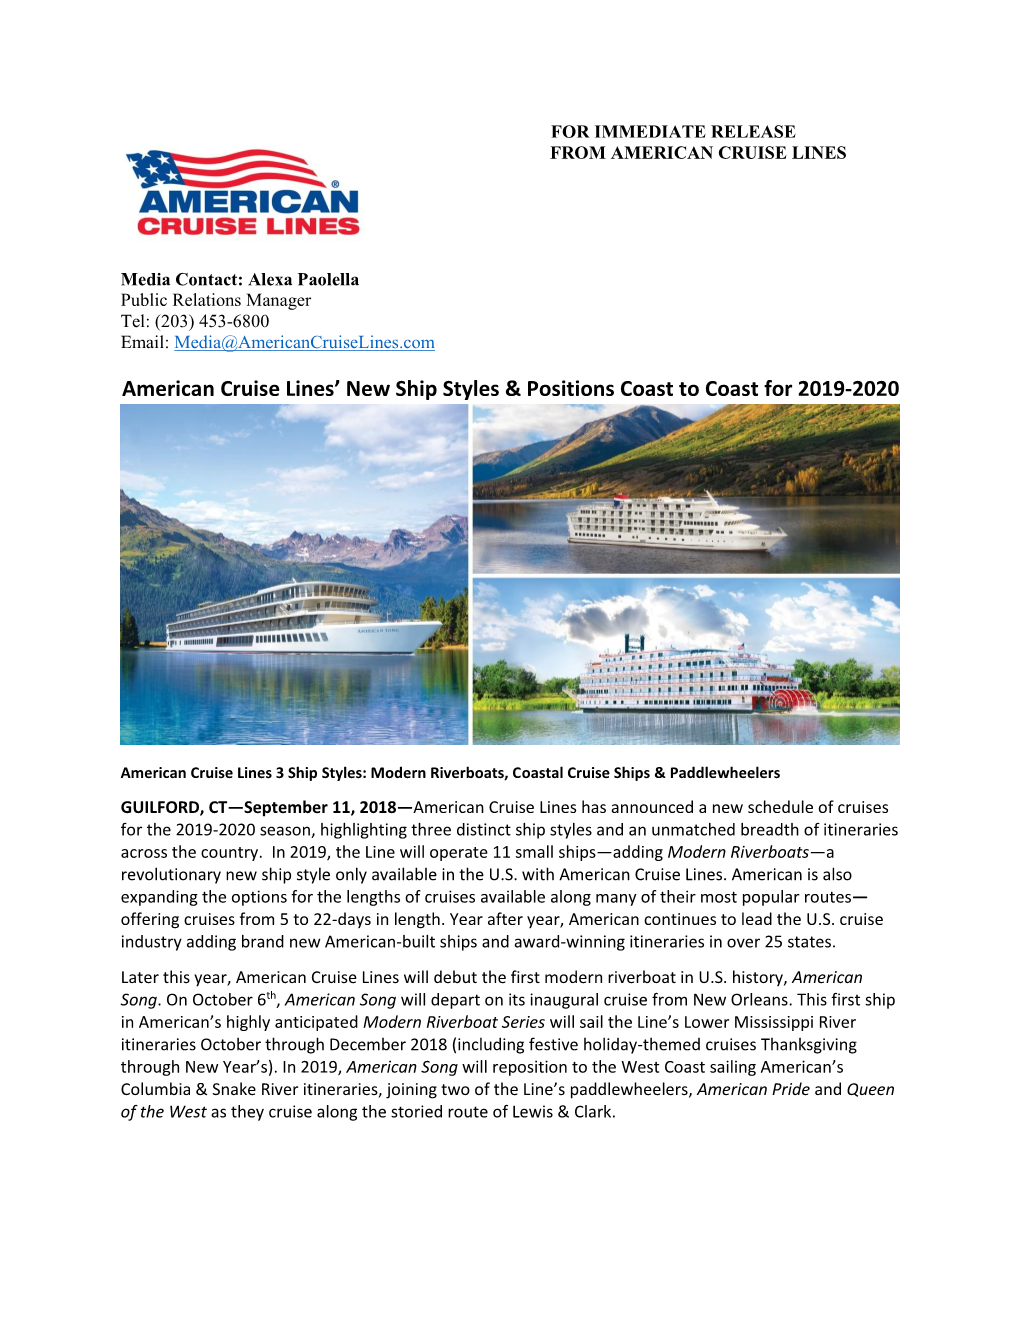 American Cruise Lines' New Ship Styles & Positions Coast to Coast